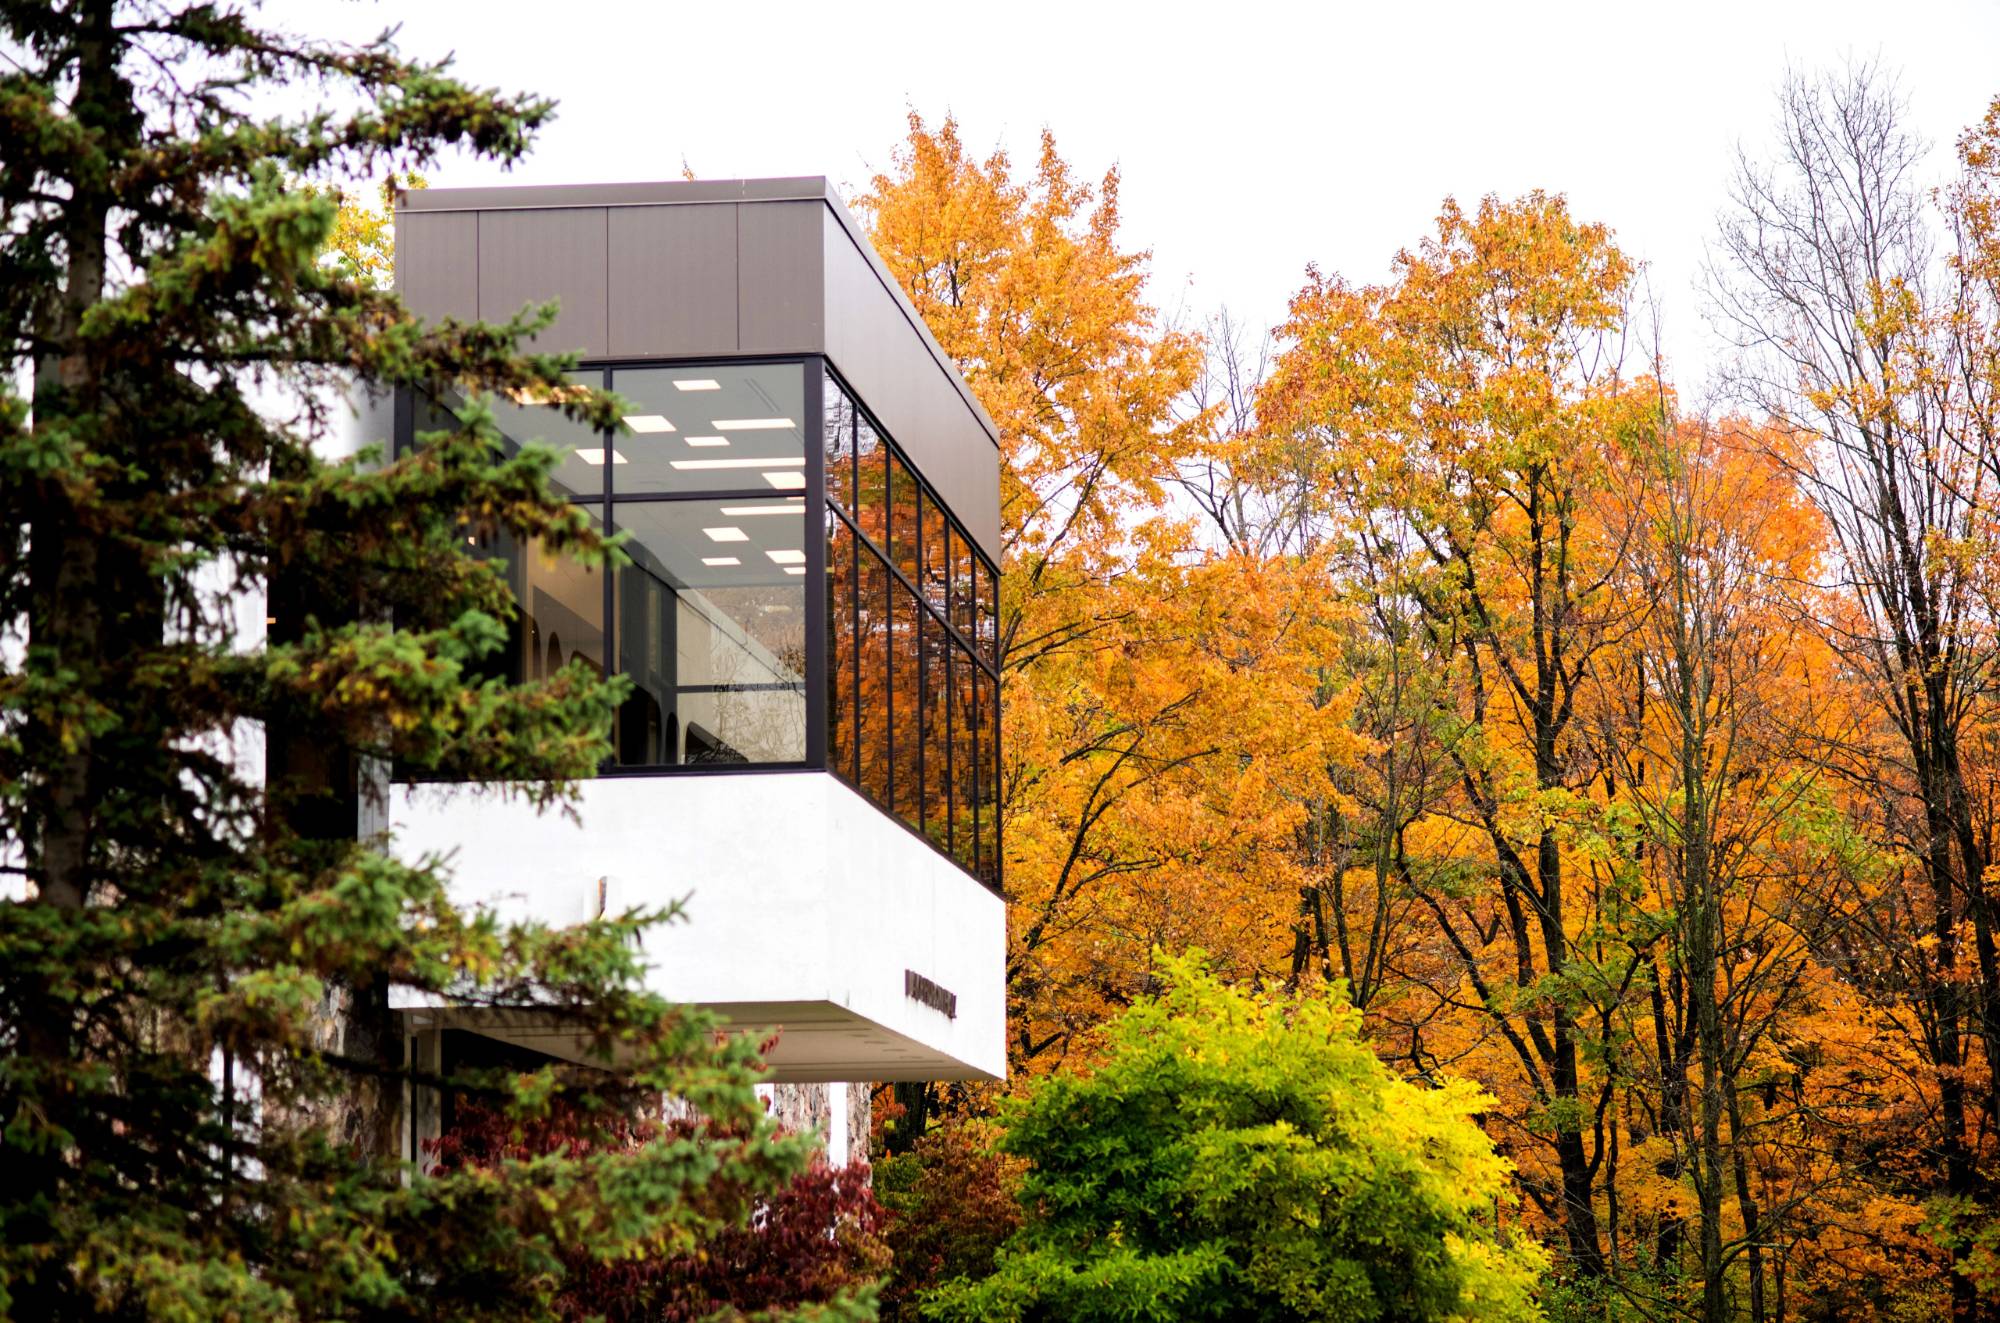 Lake Huron Hall windowed balcony surrounded by fall foilage